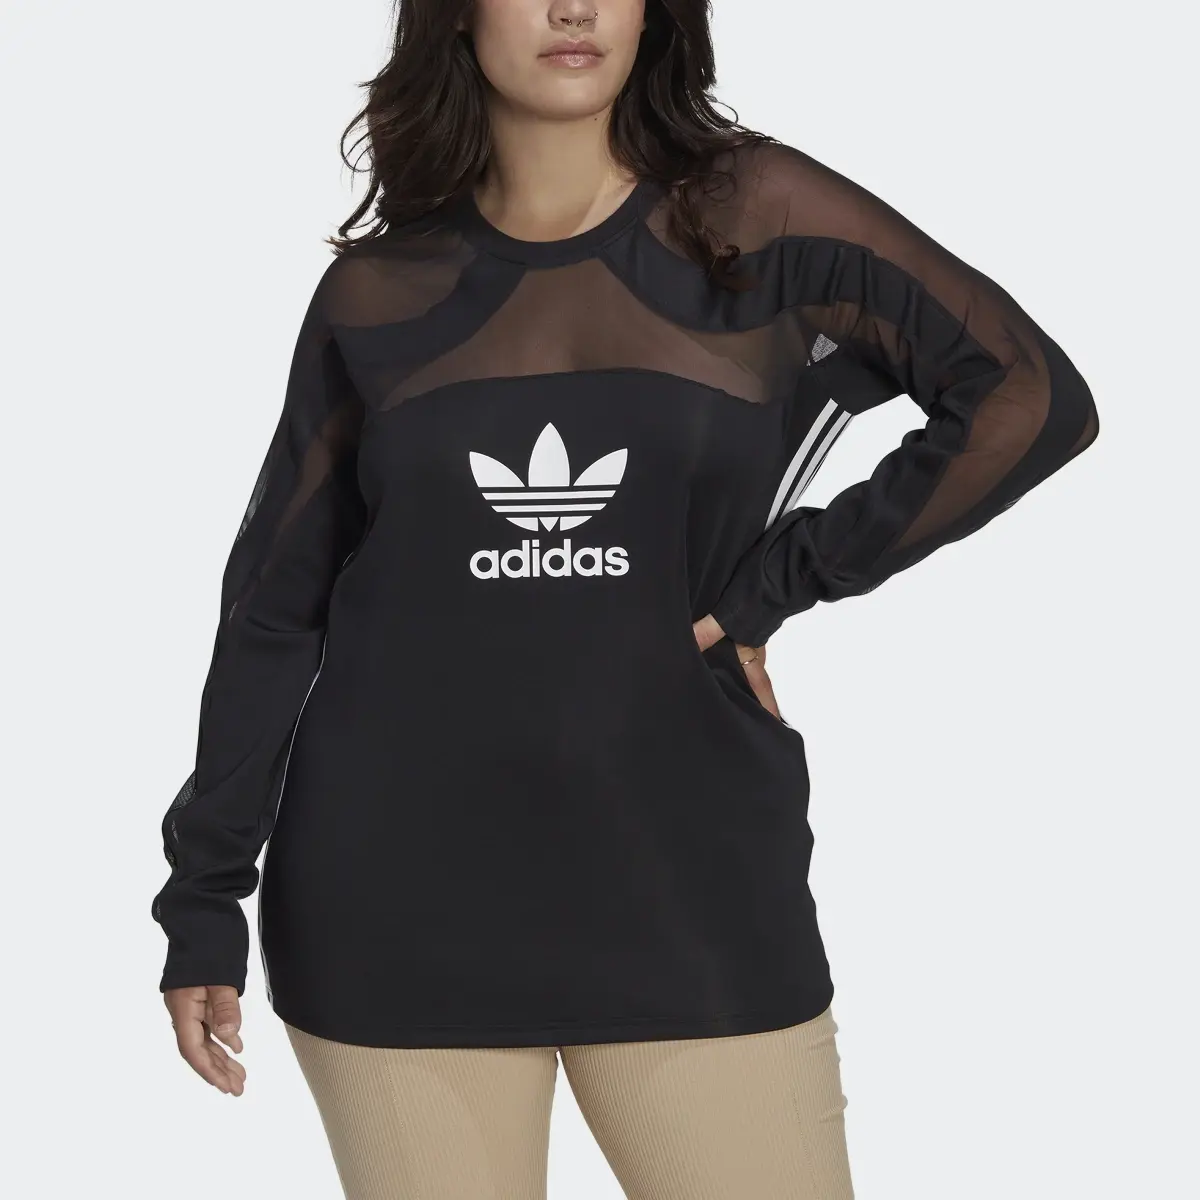 Adidas Centre Stage Mesh Top (Plus Size). 1